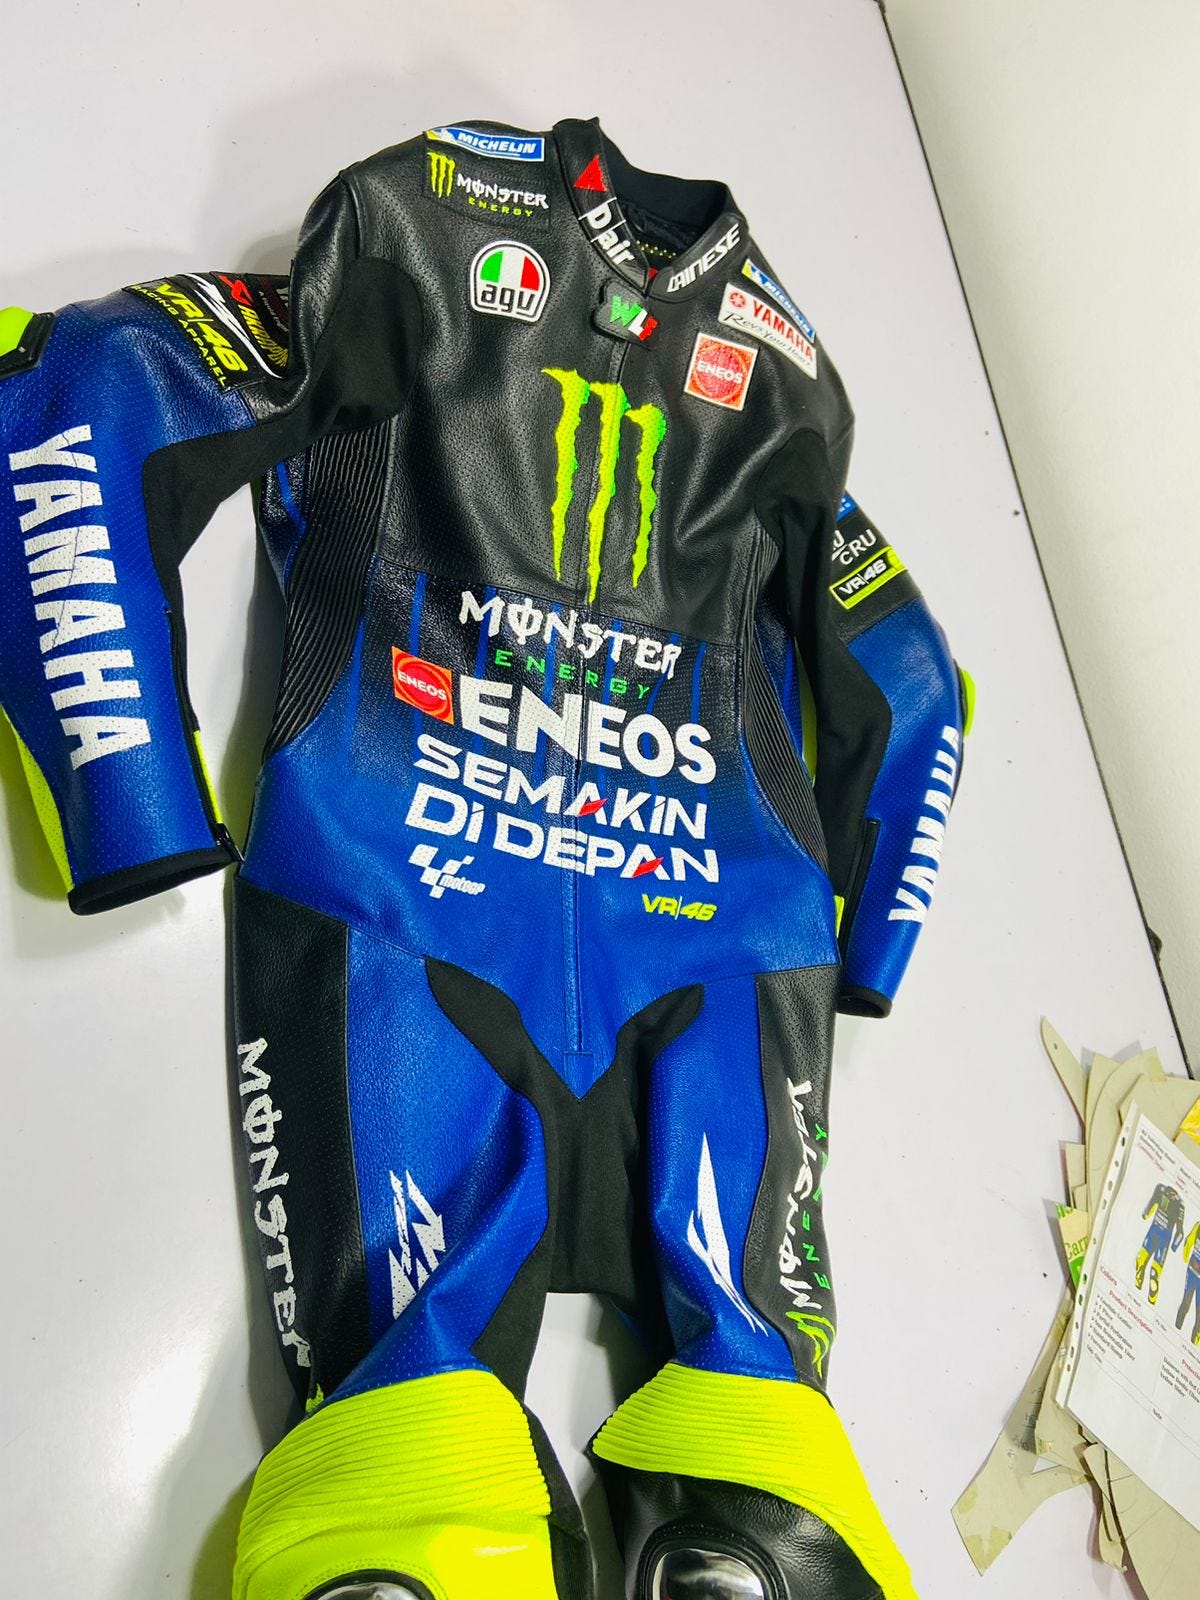 MotoGP Gears Who makes the best motorcycle suit : Custom Leather Suit Maker  and supplier | by Motogpgearsllc | Medium